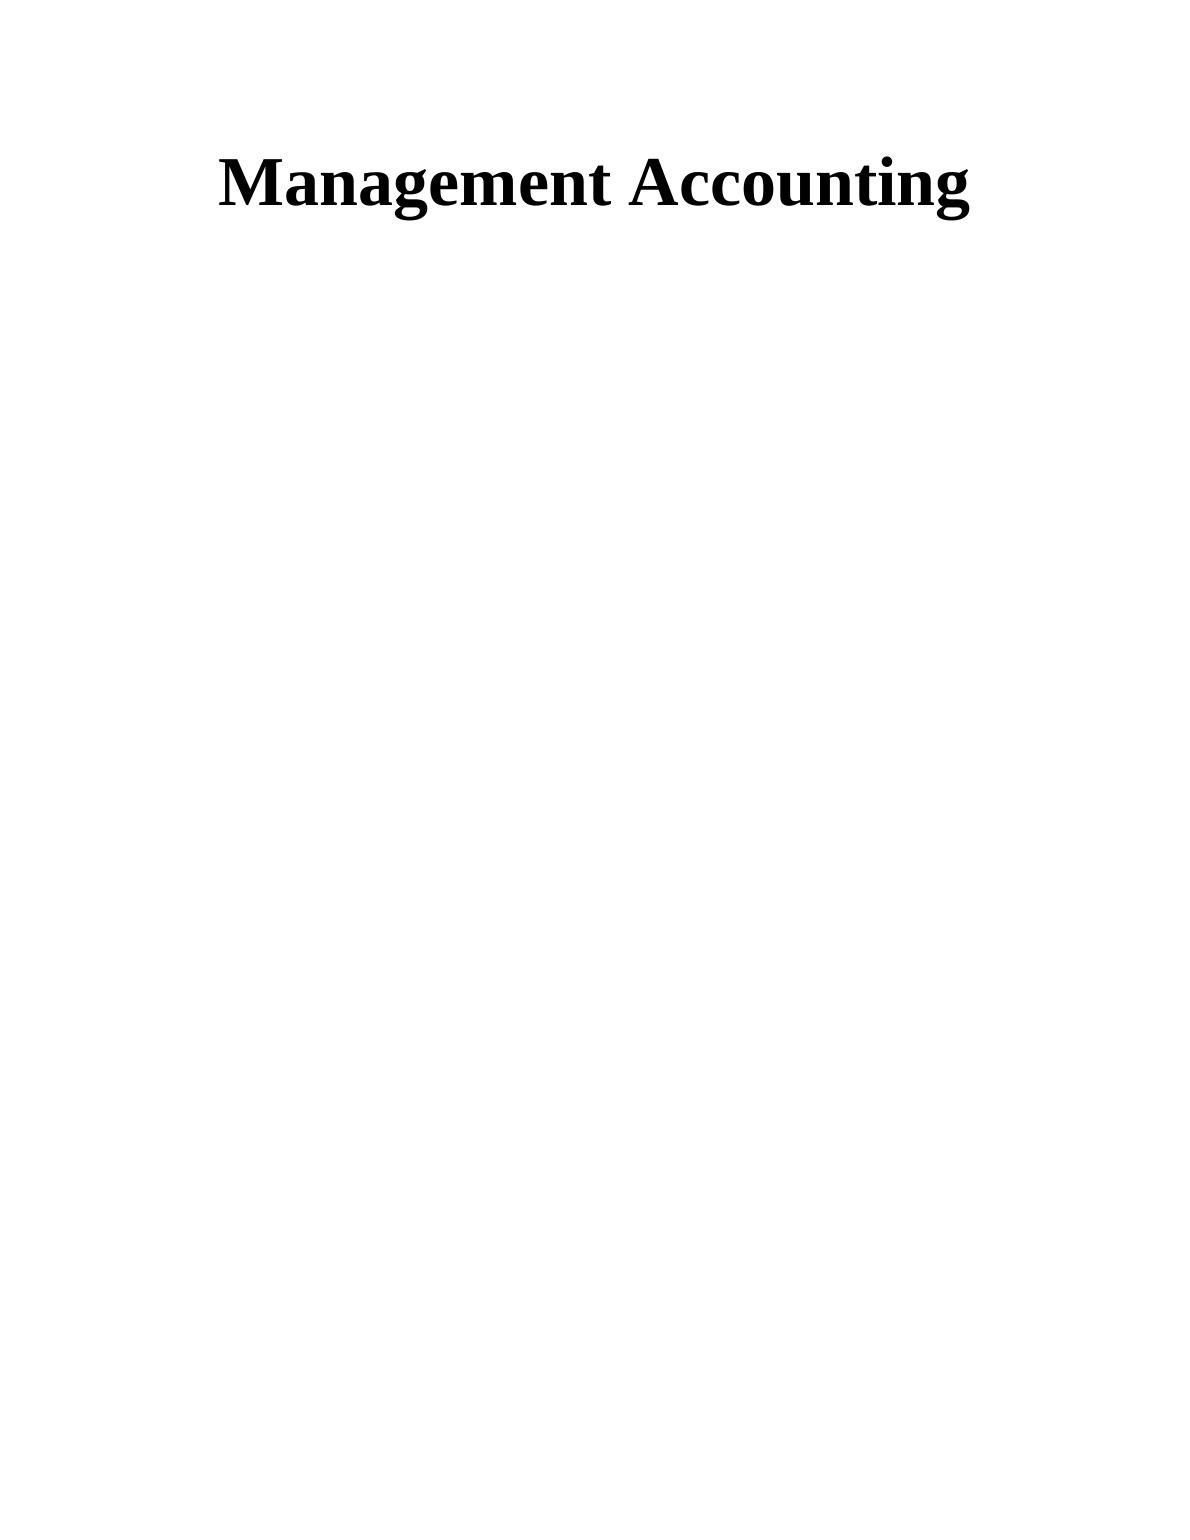 Management Accounting Assignment - Waitrose_1